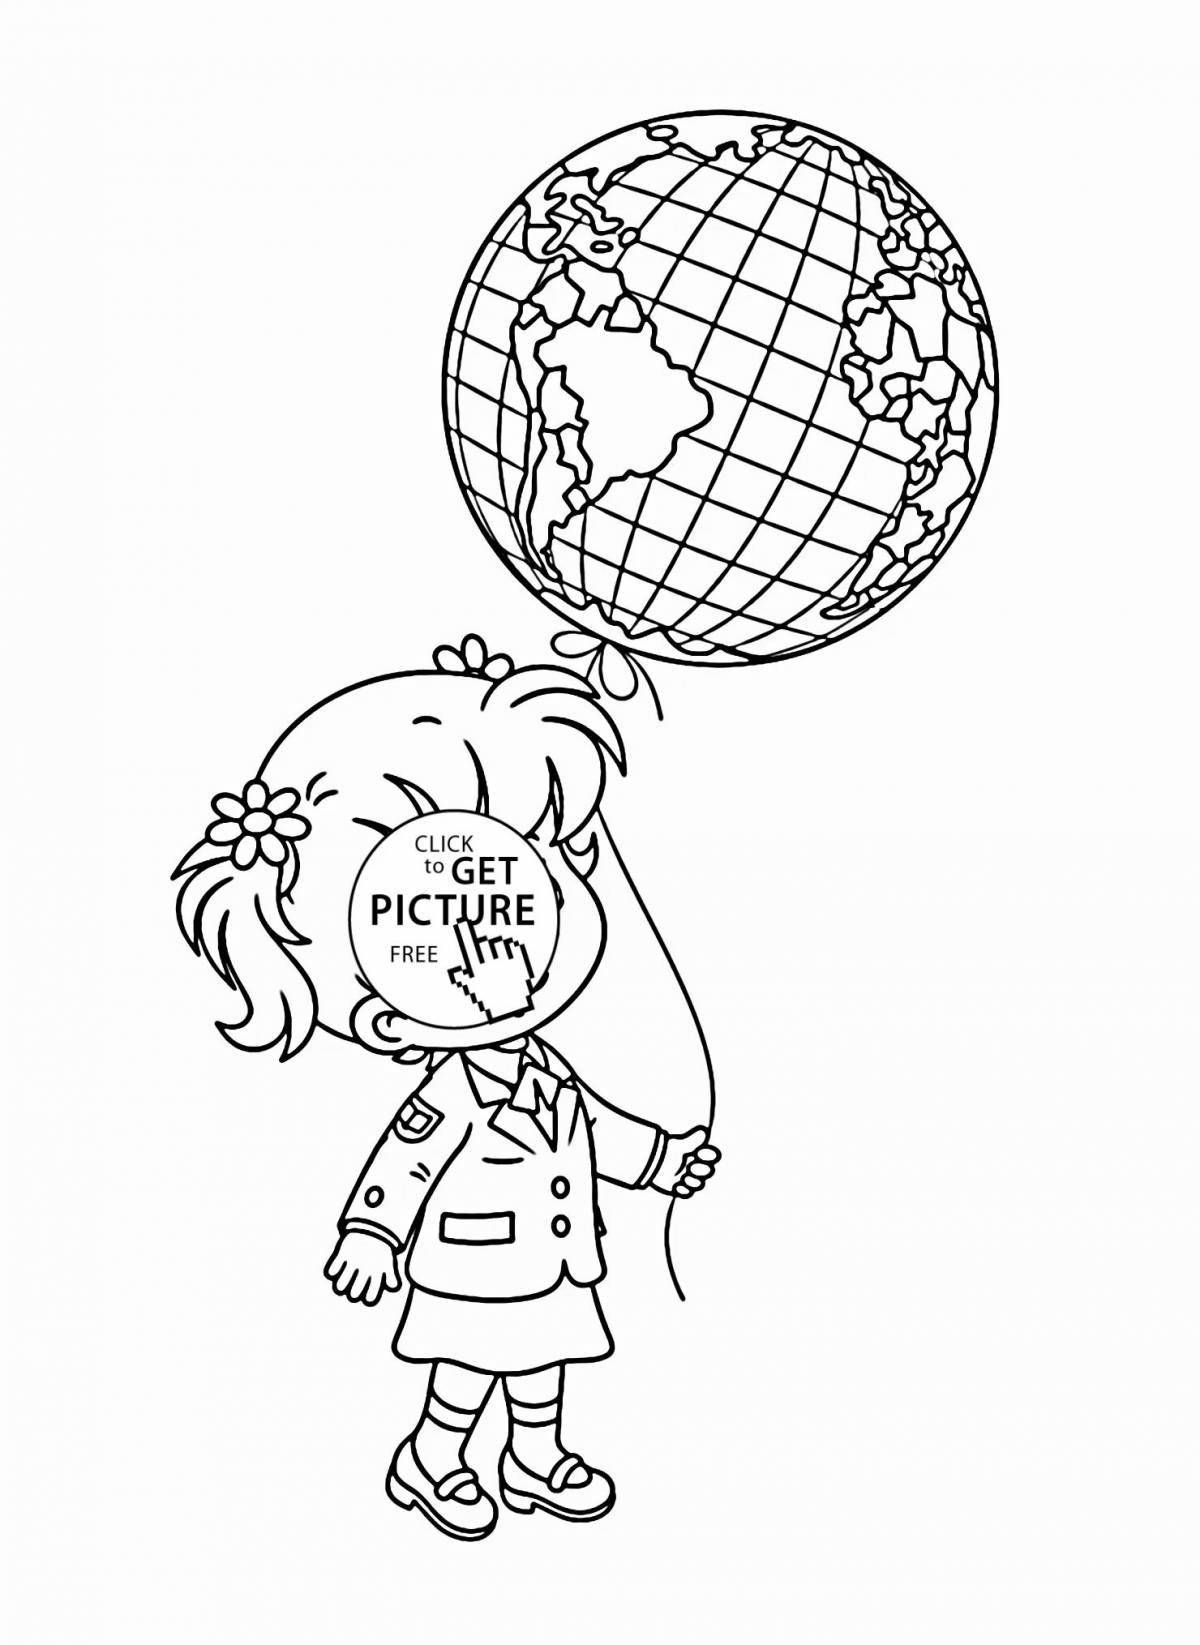 Globe drawing for kids for #7